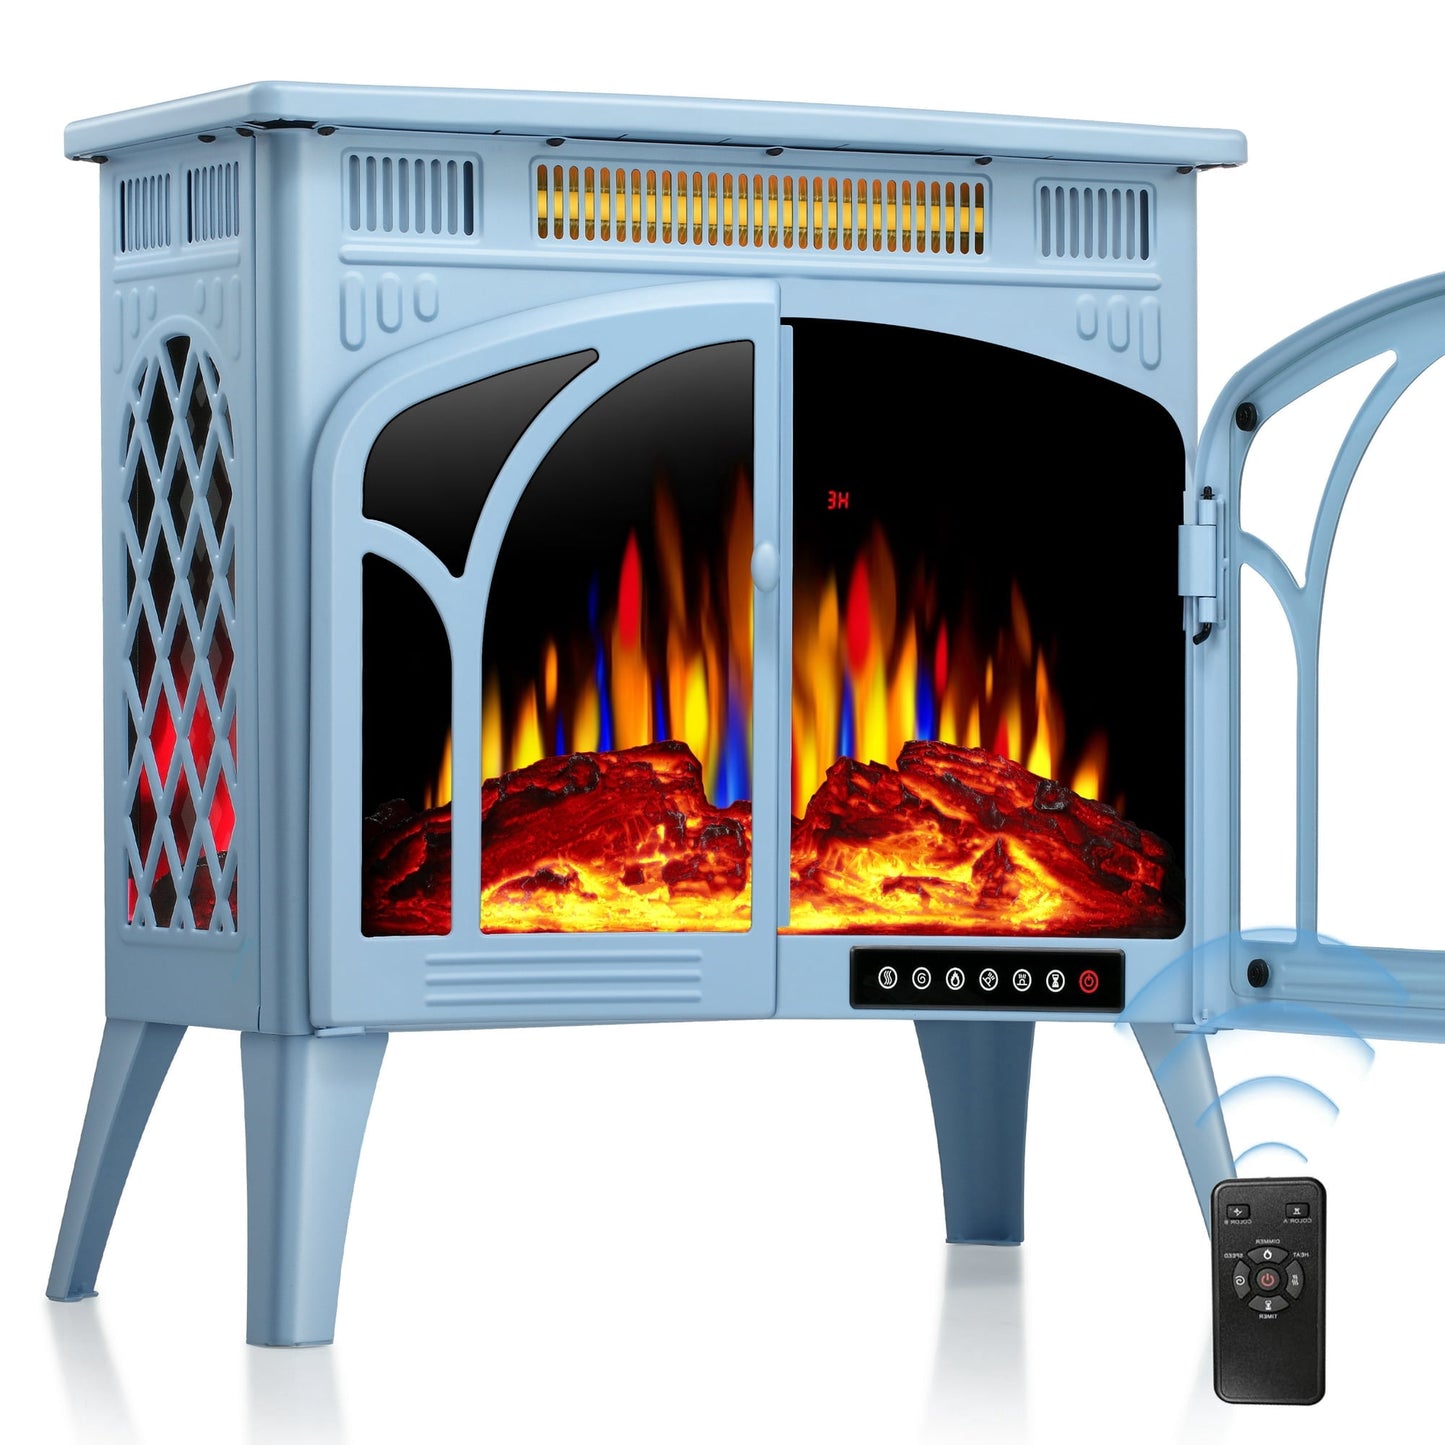 KISSAIR Electric Fireplace Heater 25’’ with 3D Realistic Flame Effect, Freestanding Fireplace with Remote Control, 500W/1500W,- BLUE